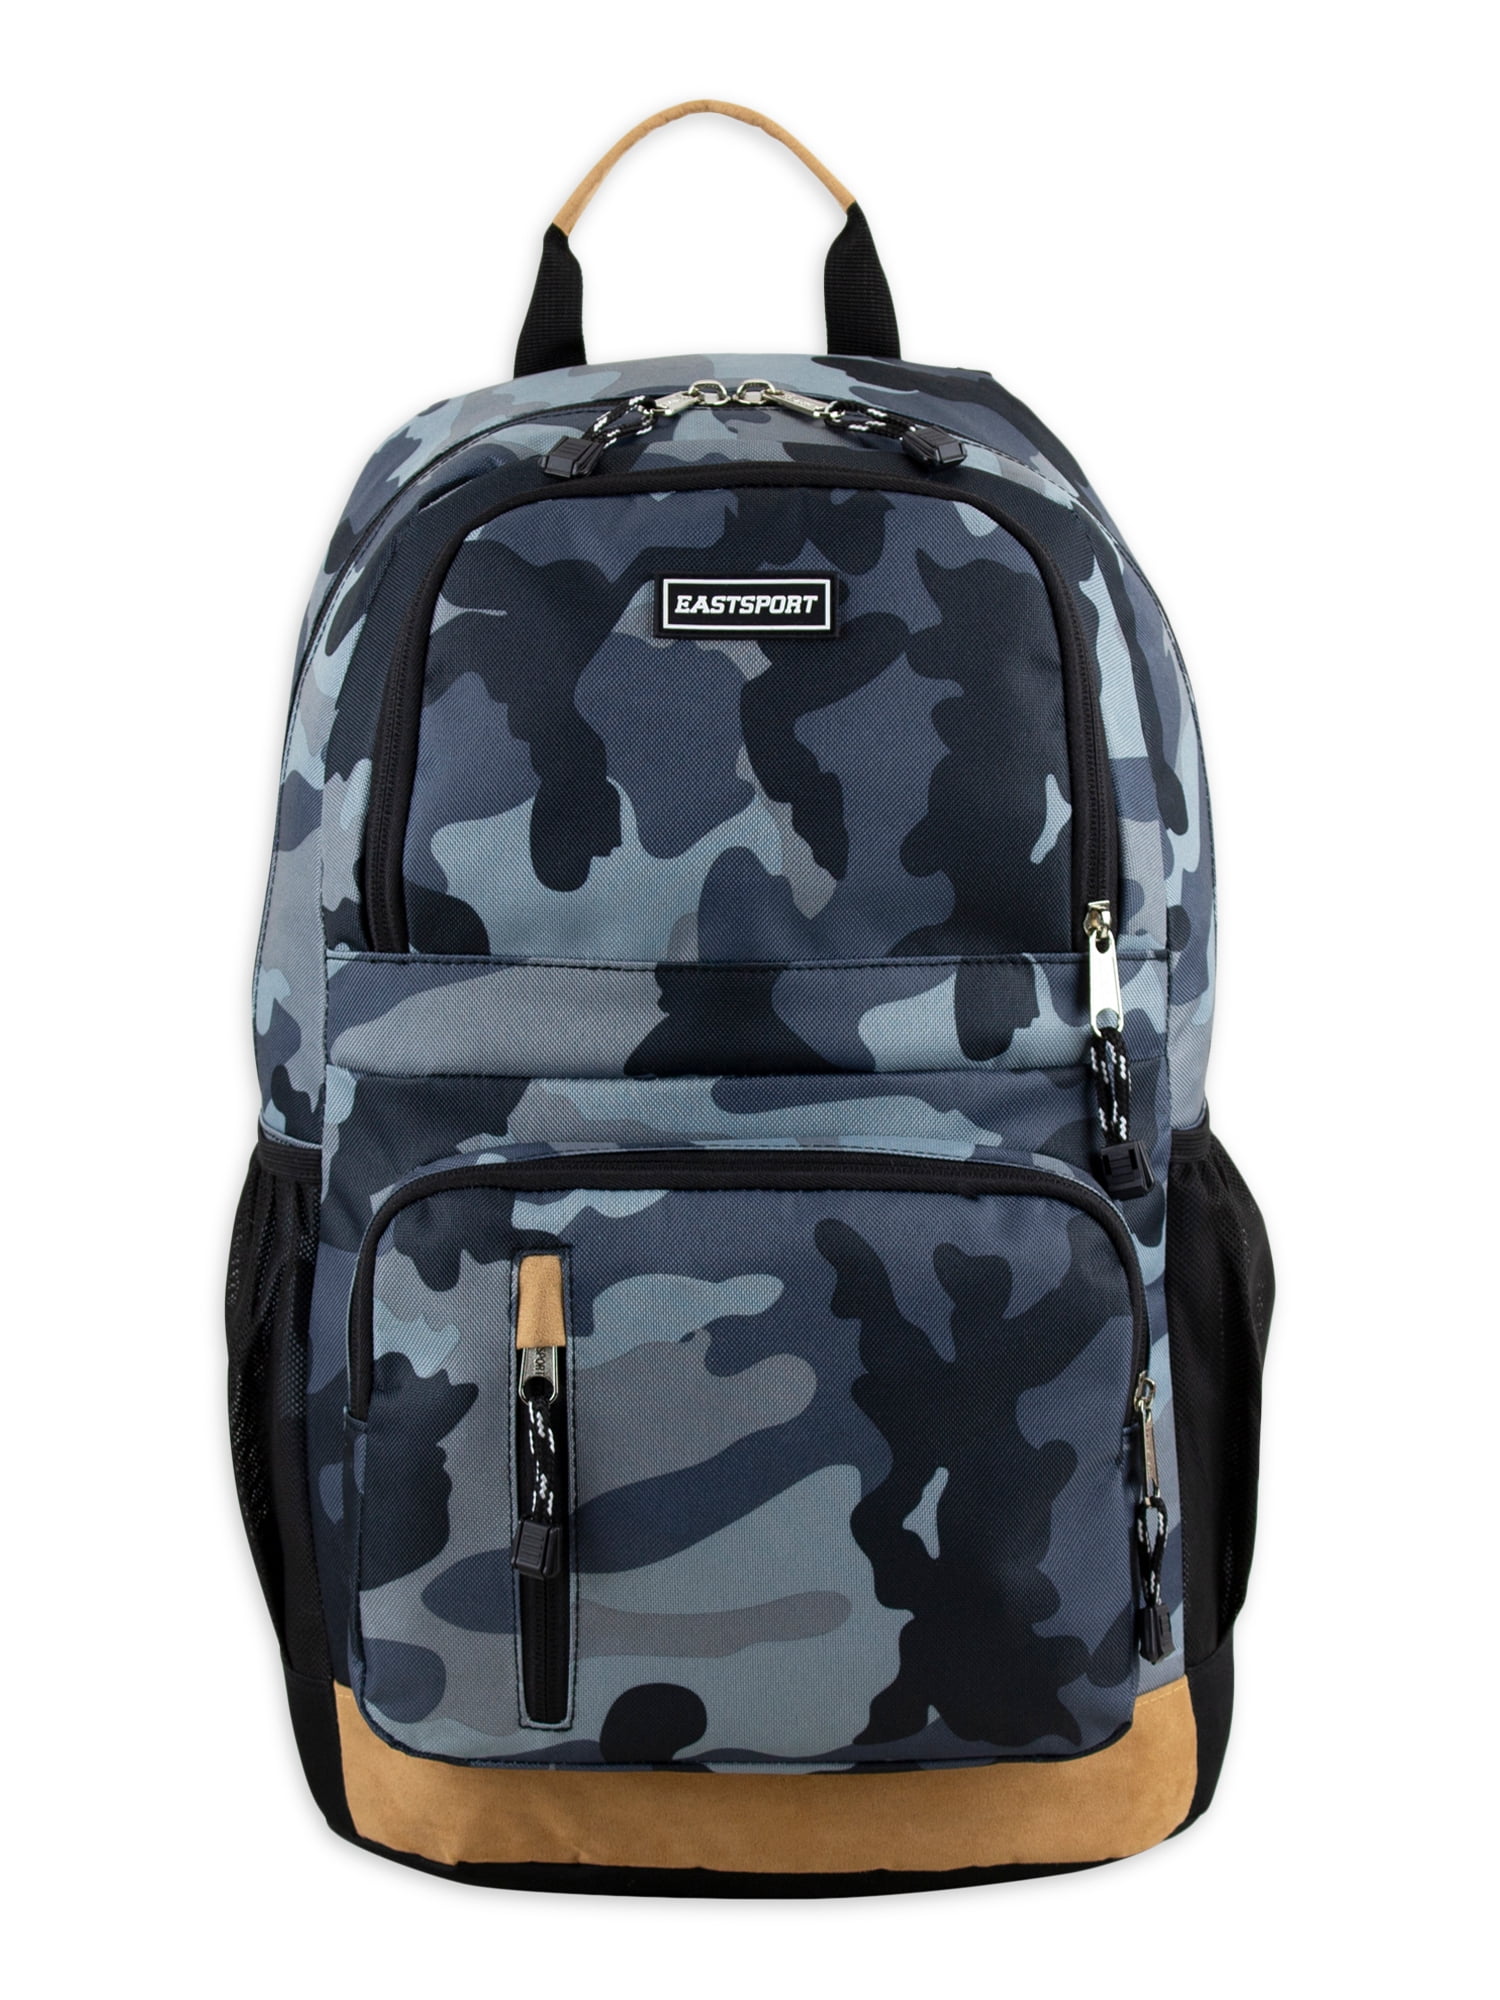 Military Raider 30L Marpat Navy Digital Camo Backpack with Rain Cover – F  Gear.in